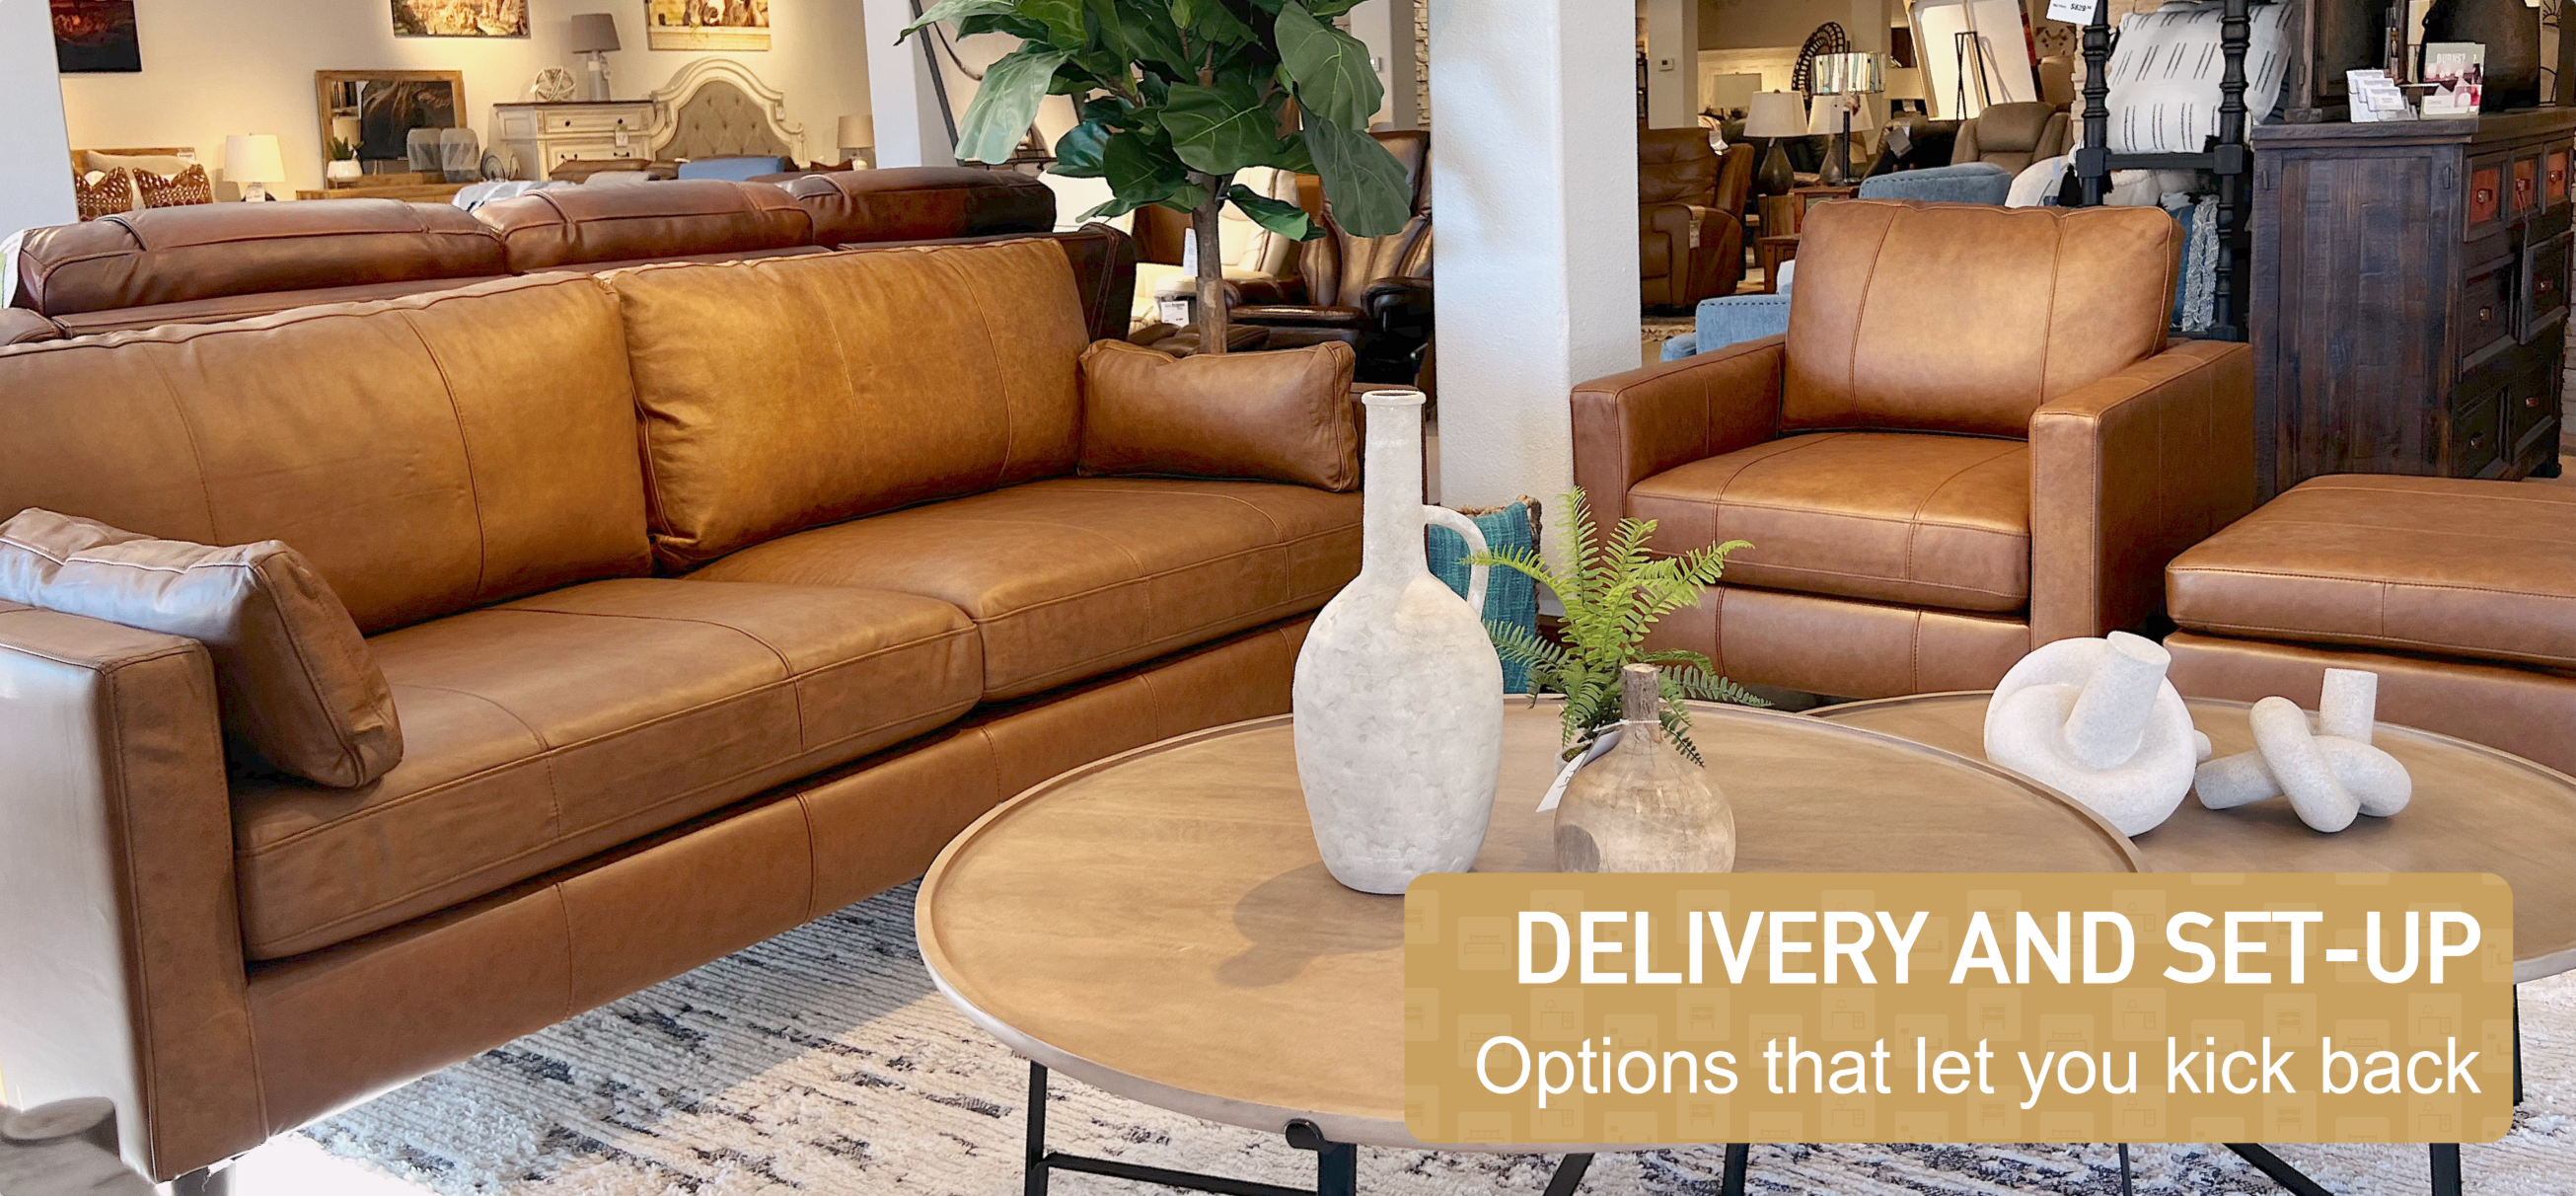 Home Furnishings Direct Delivery and Set-Up